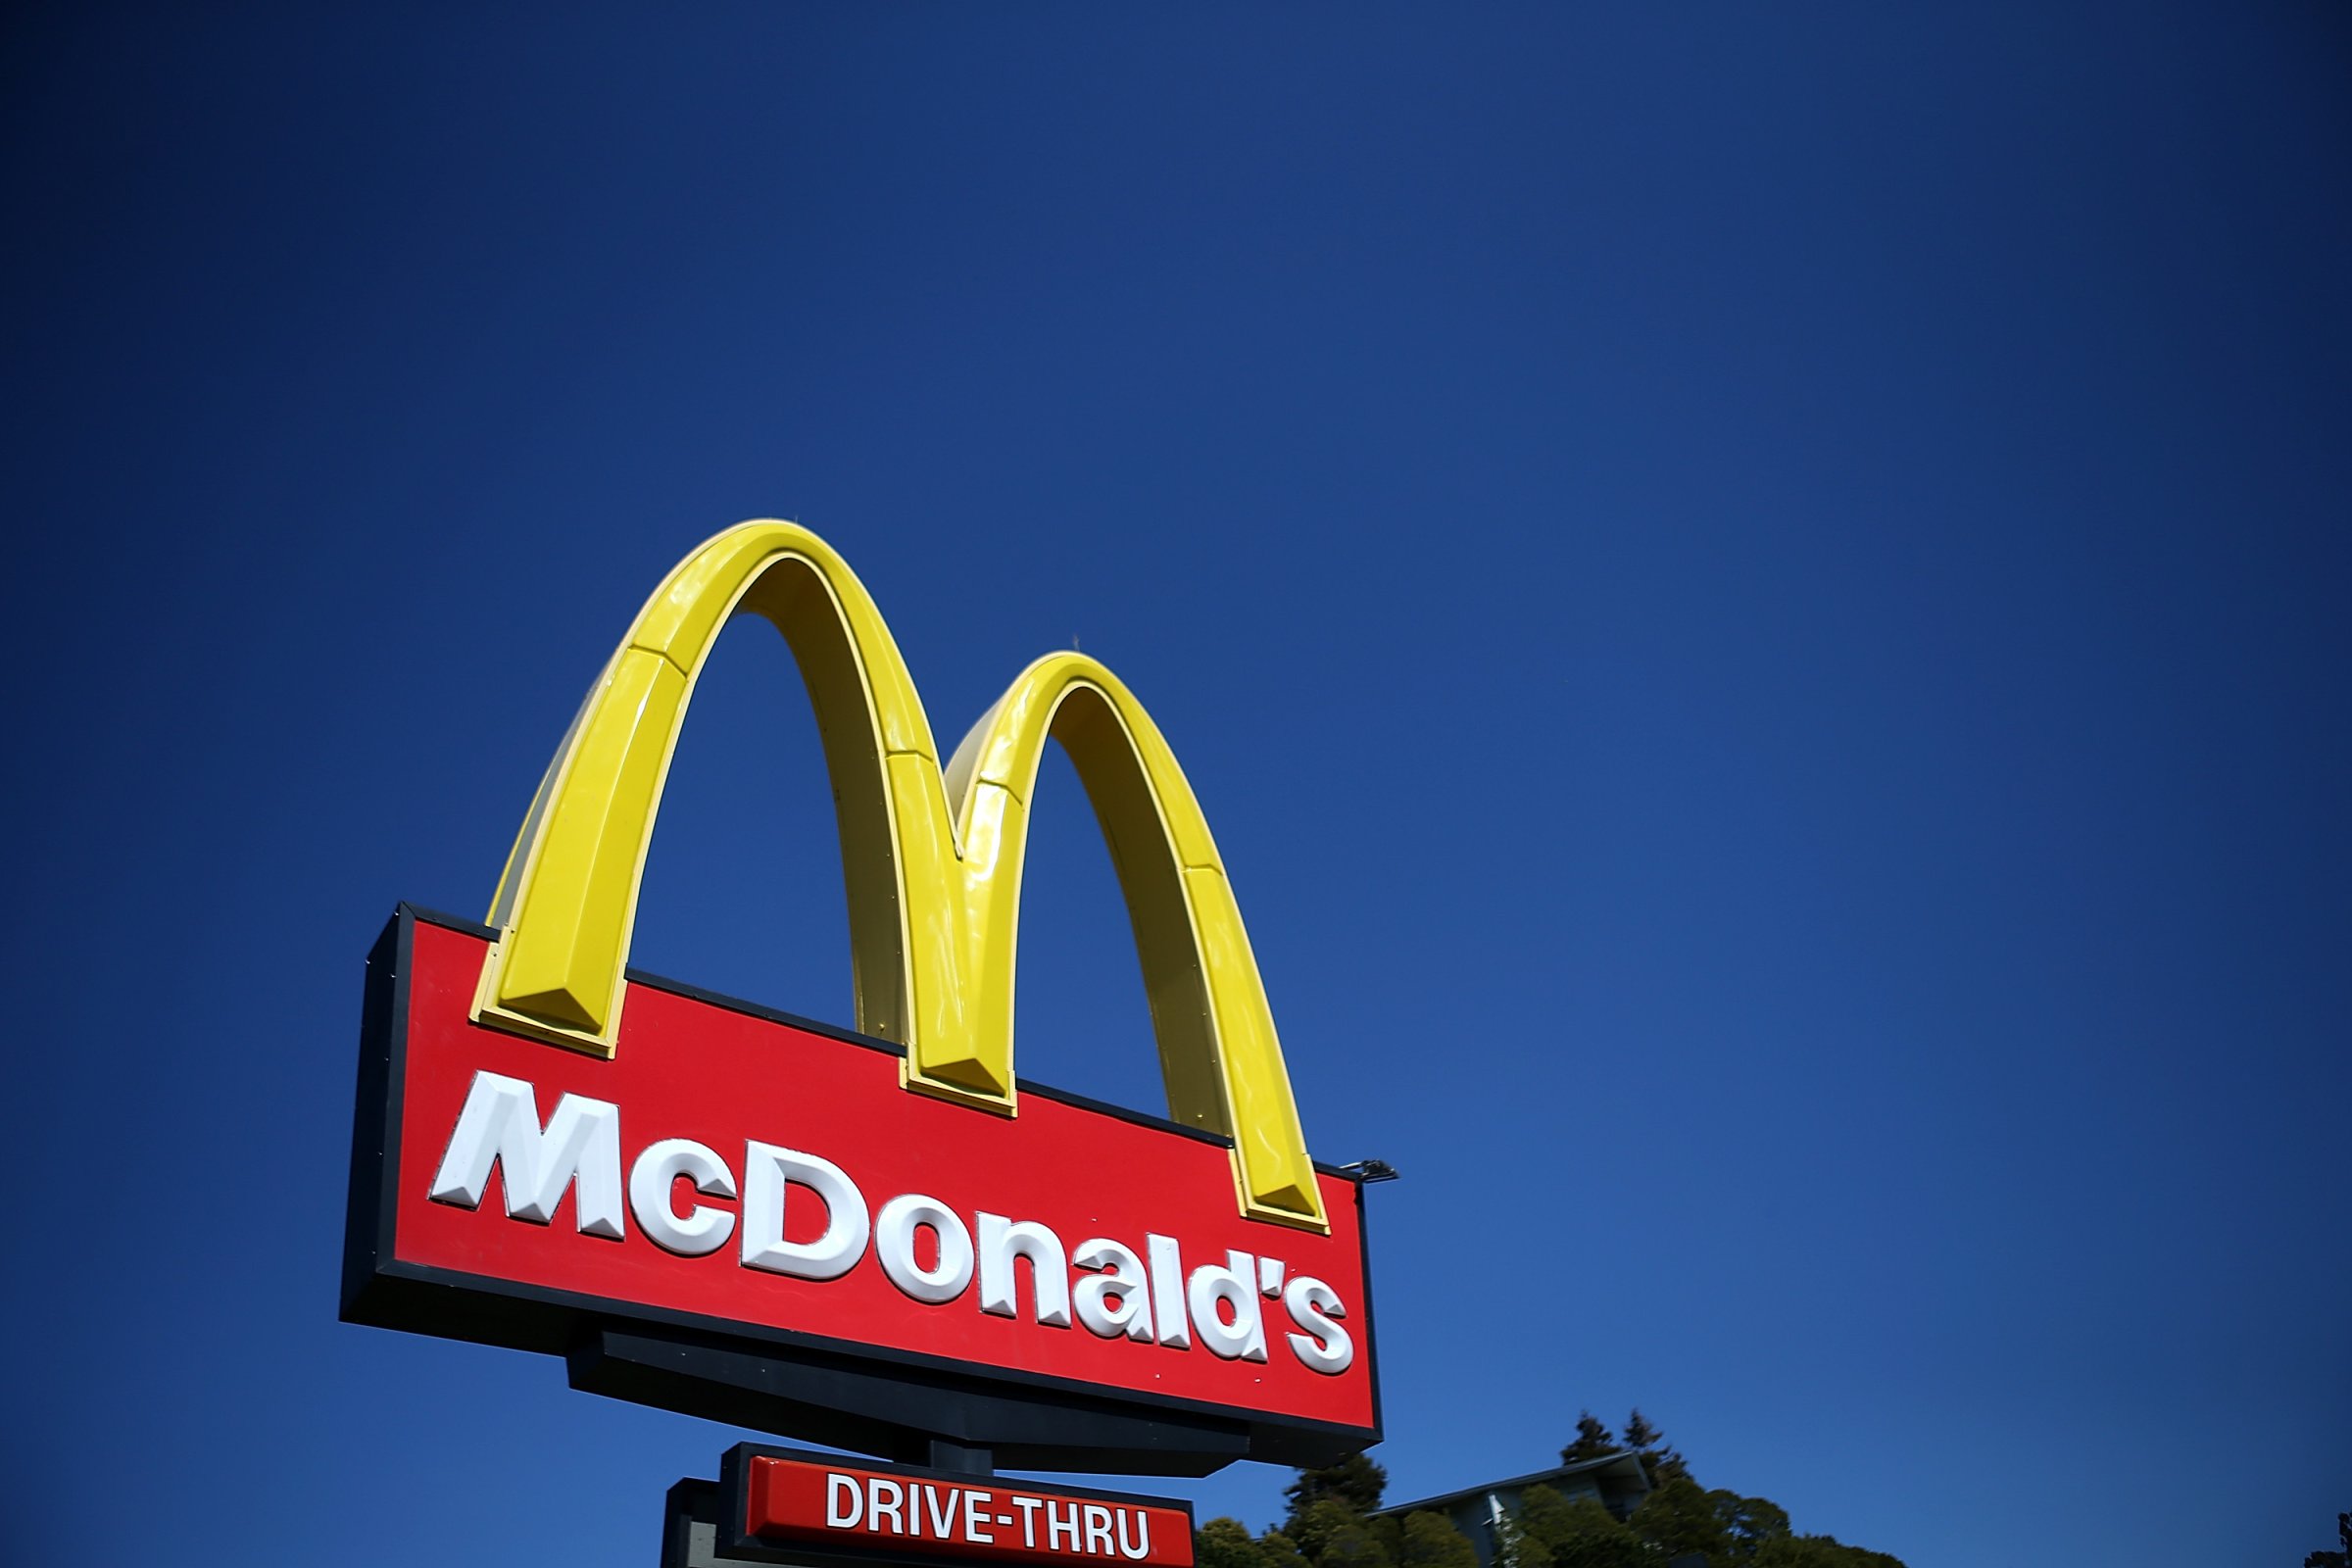 A McDonald's restaurant sign on March 12, 2013 in Mill Valley, California.